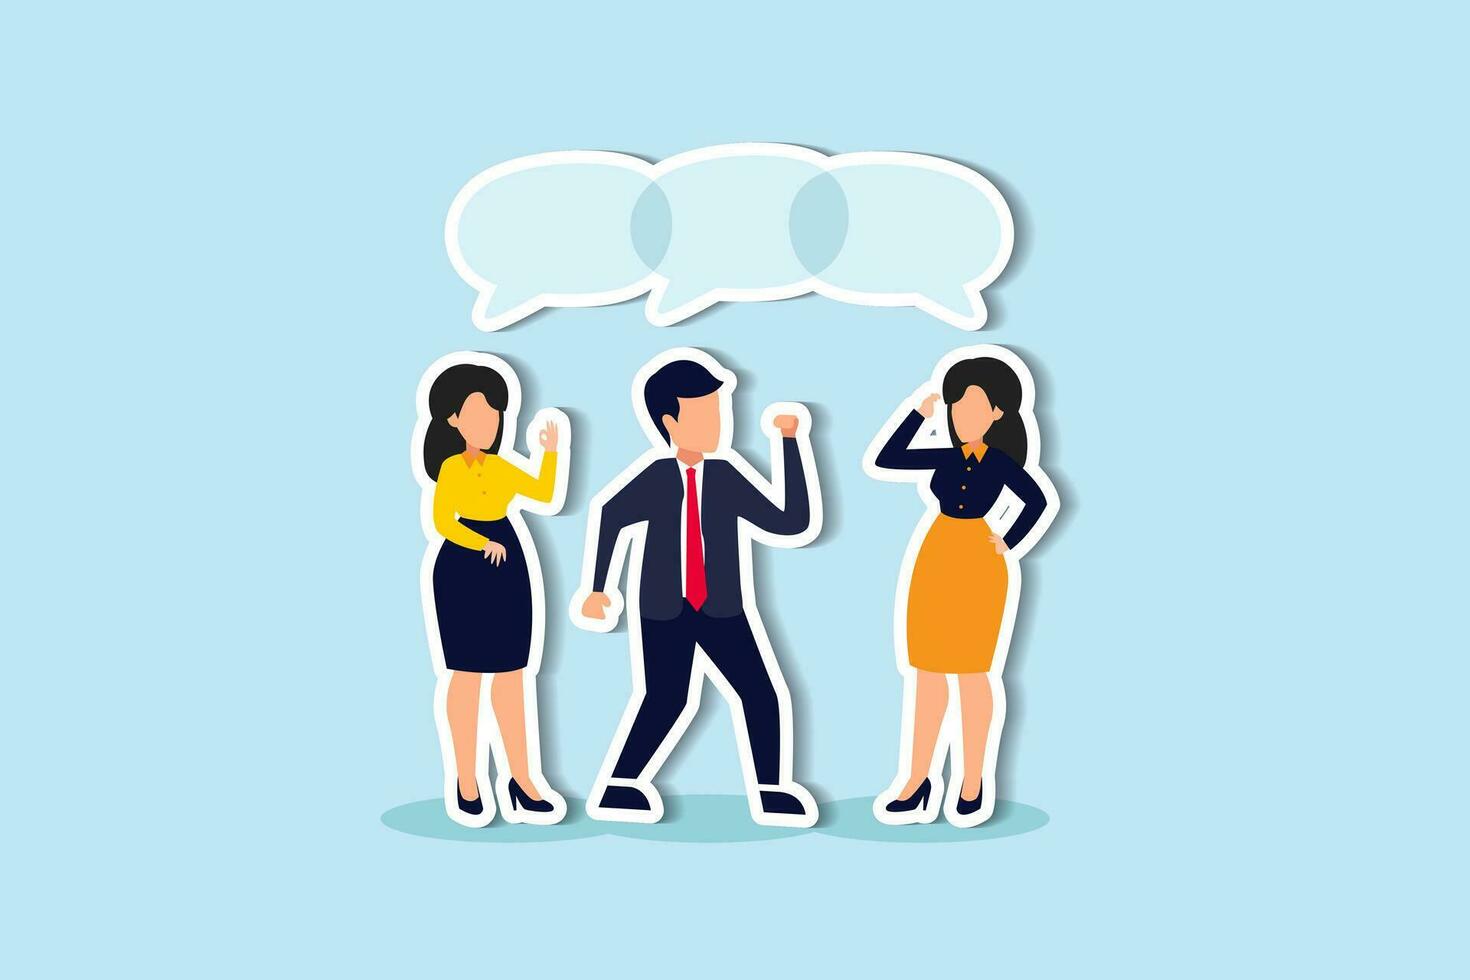 Teamwork share opinion, team meeting sharing idea to solve problem, discussion and thought in business meeting concept, businessmen and women working team speak with shared their thought speech bubble vector